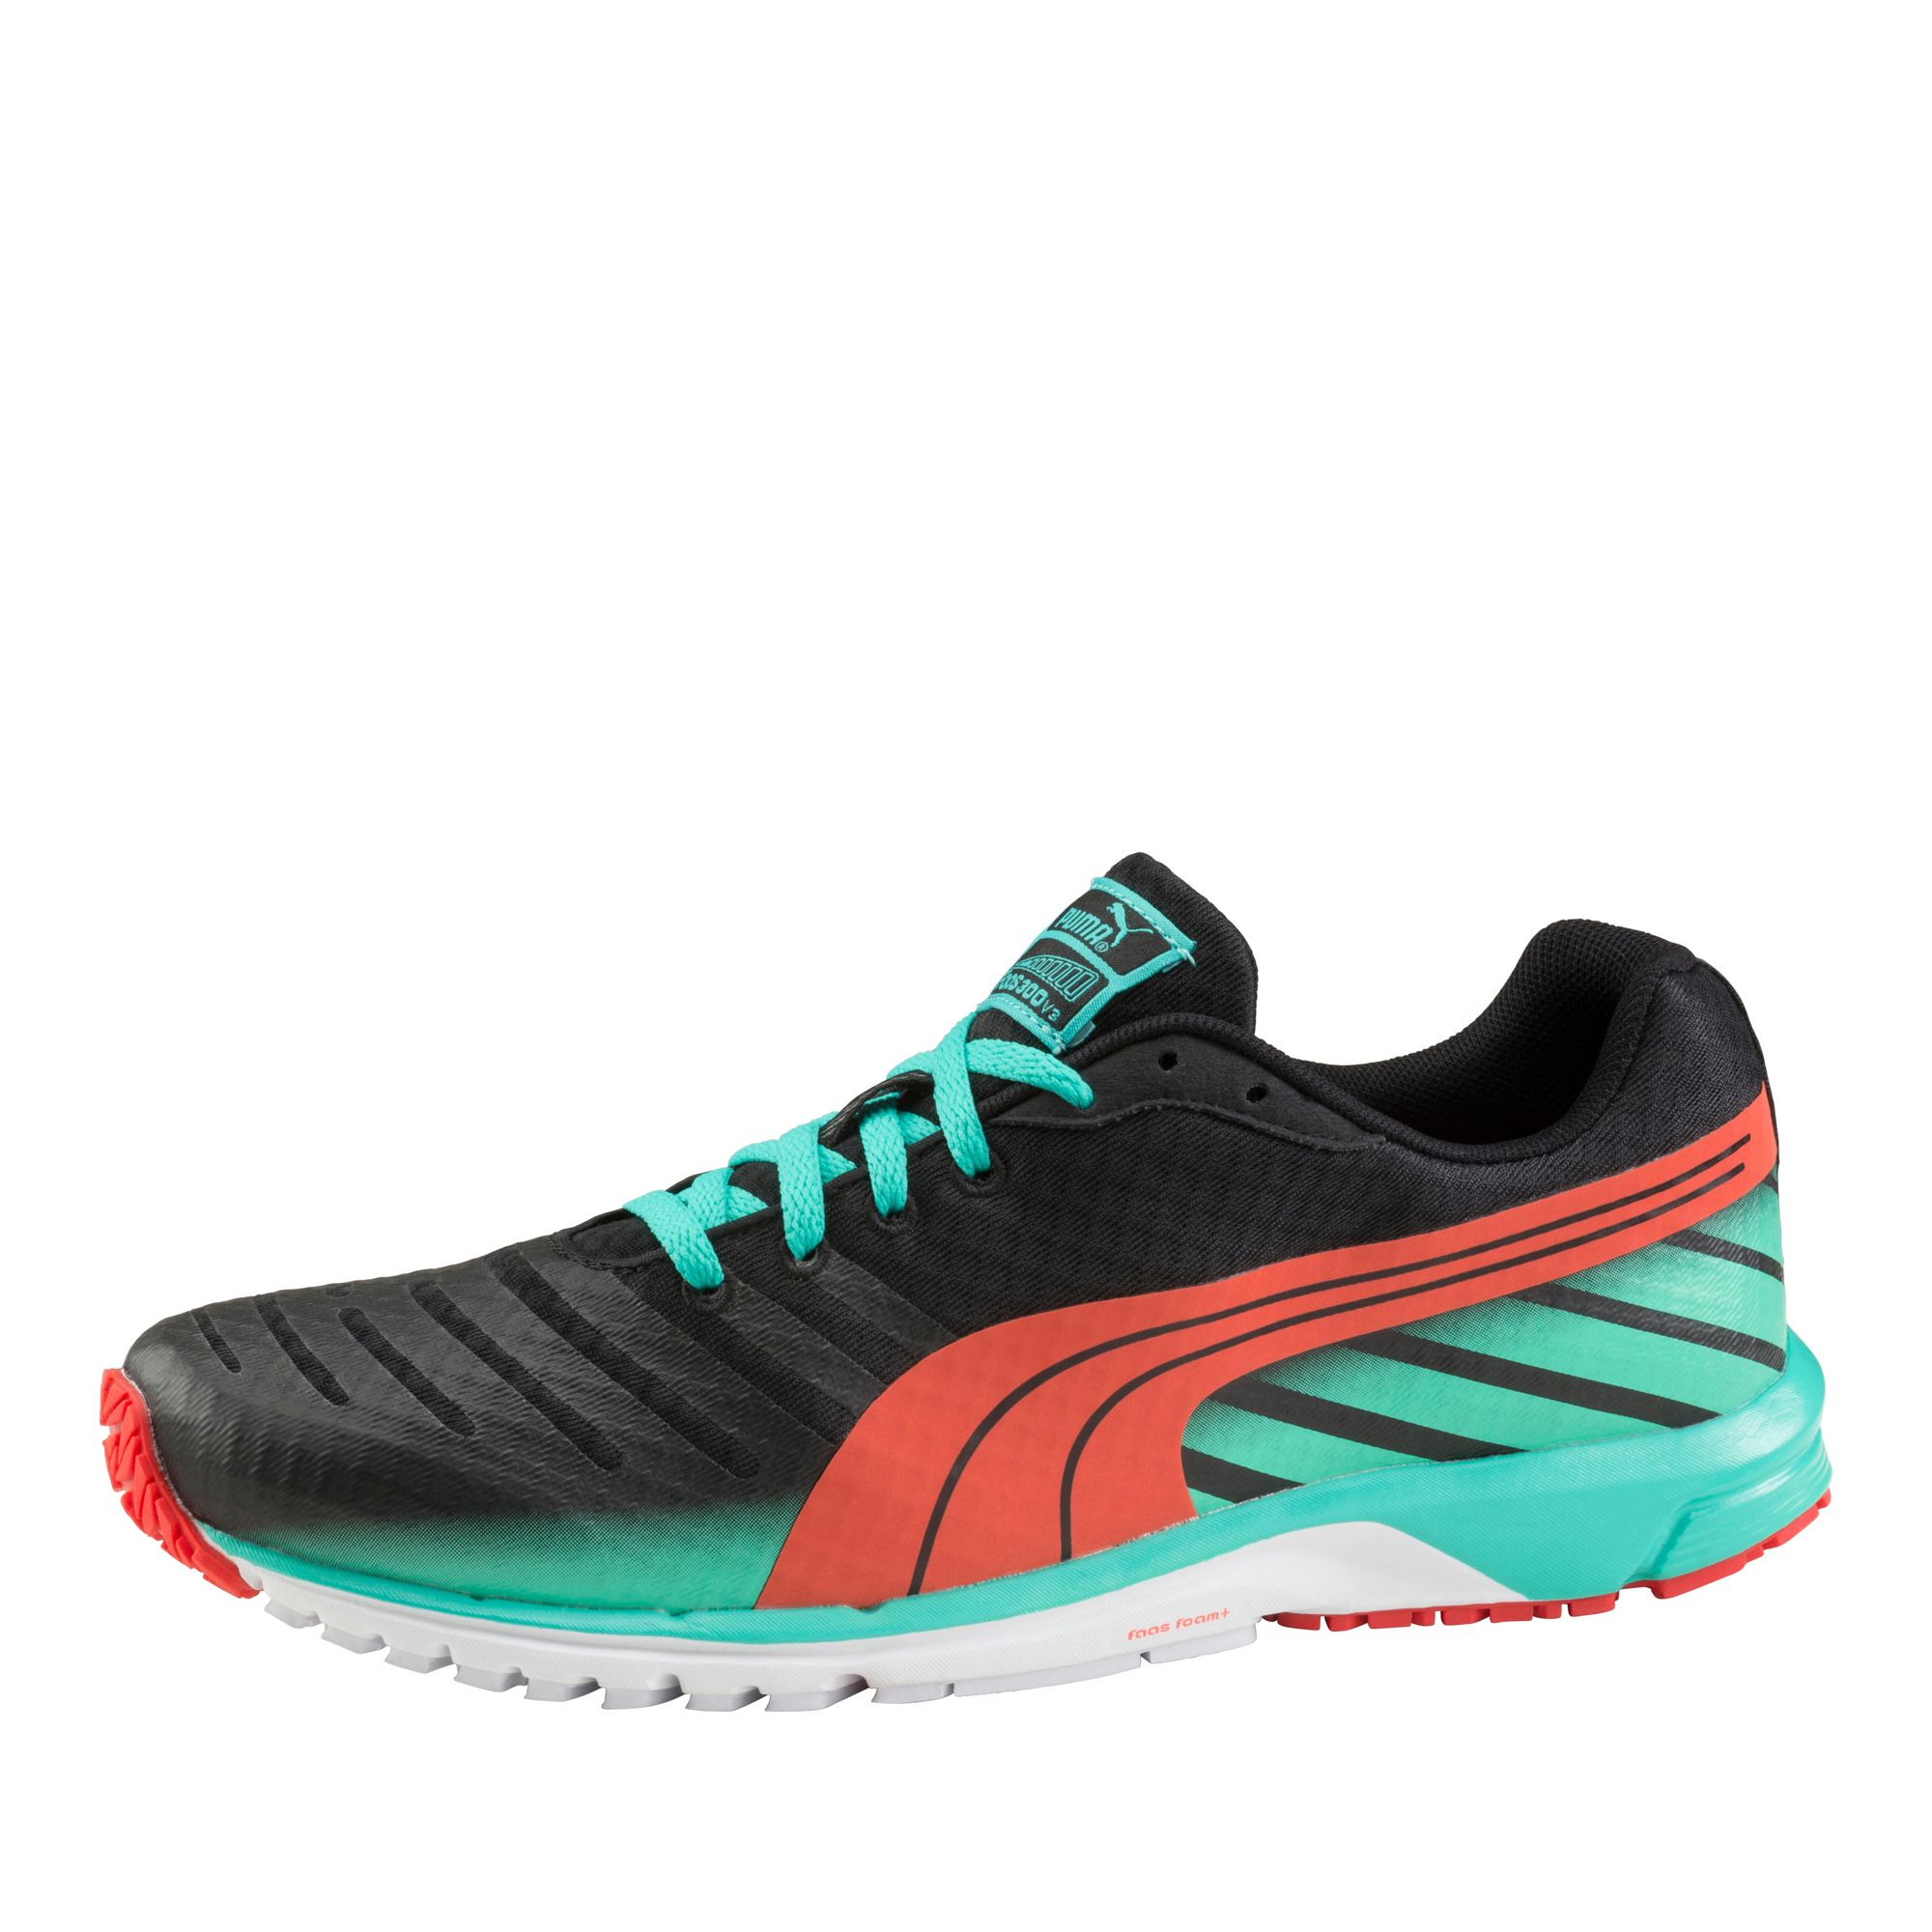 FAAS 300 v3 Running Shoes 